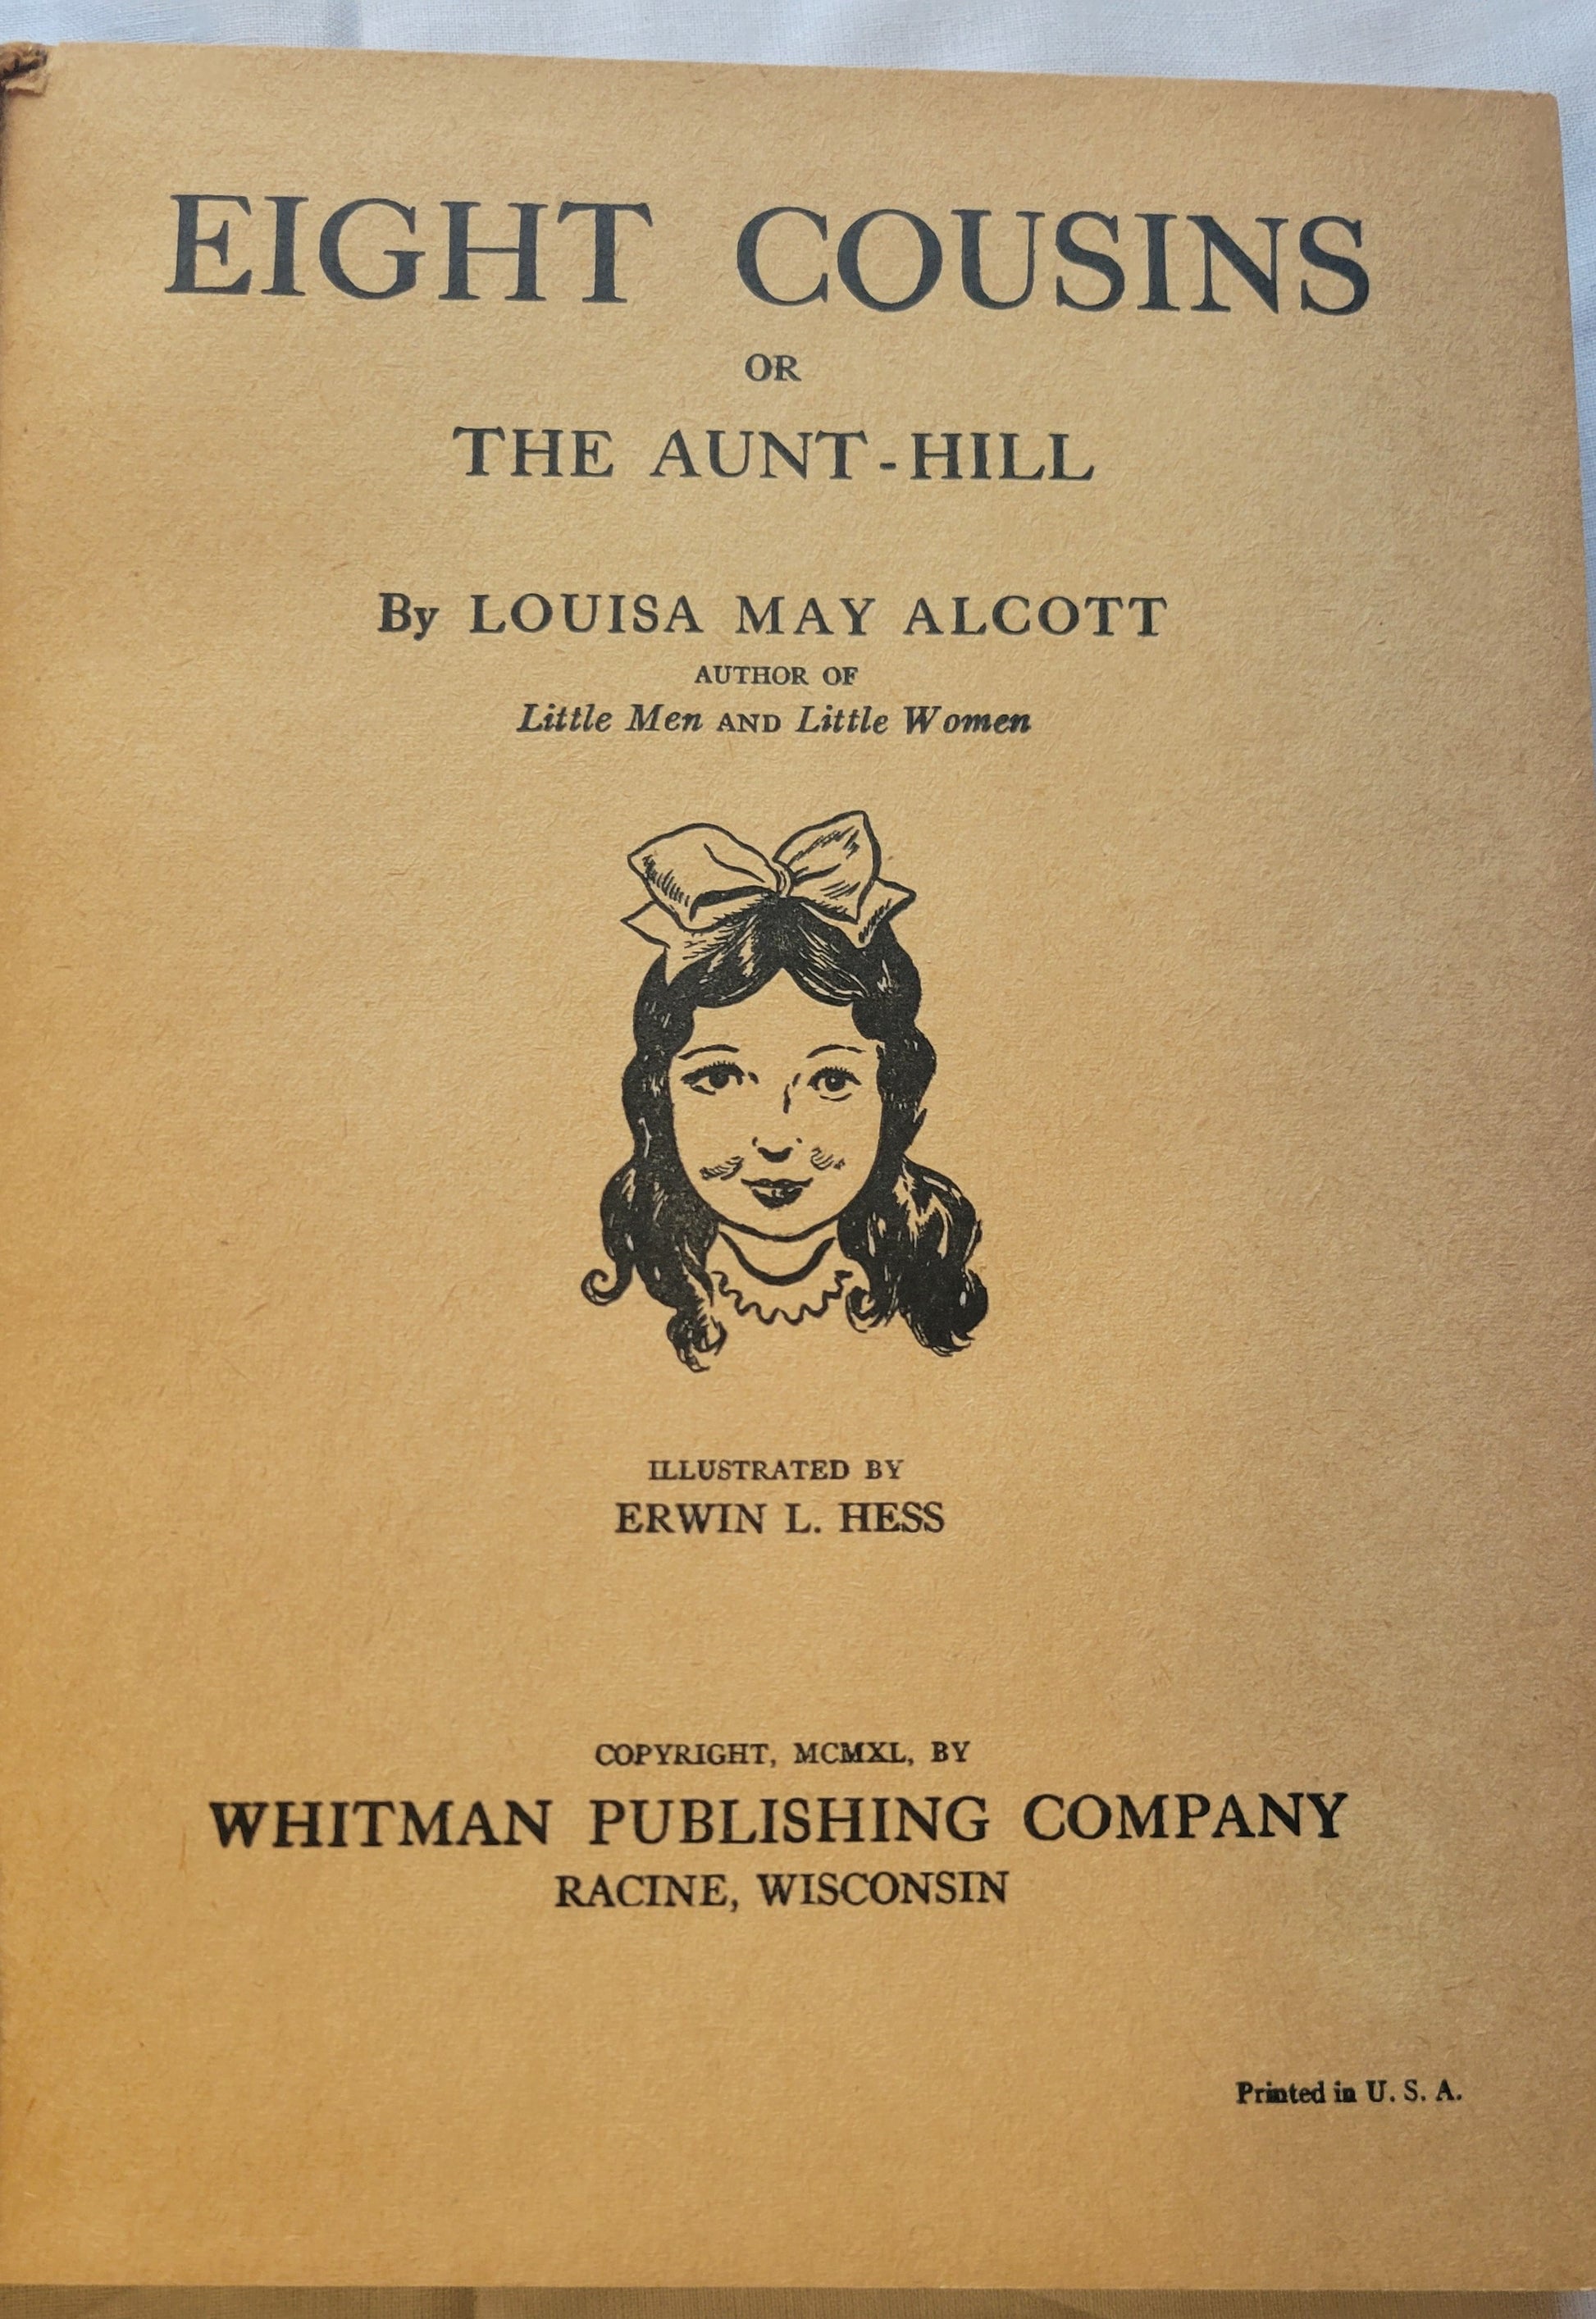 Vintage book "Eight Cousins" by Louisa May Alcott (author of Little Women), illustrated by Erwin L. Hess, and published by Whitman Publishing Company in 1940. View of inside title page.